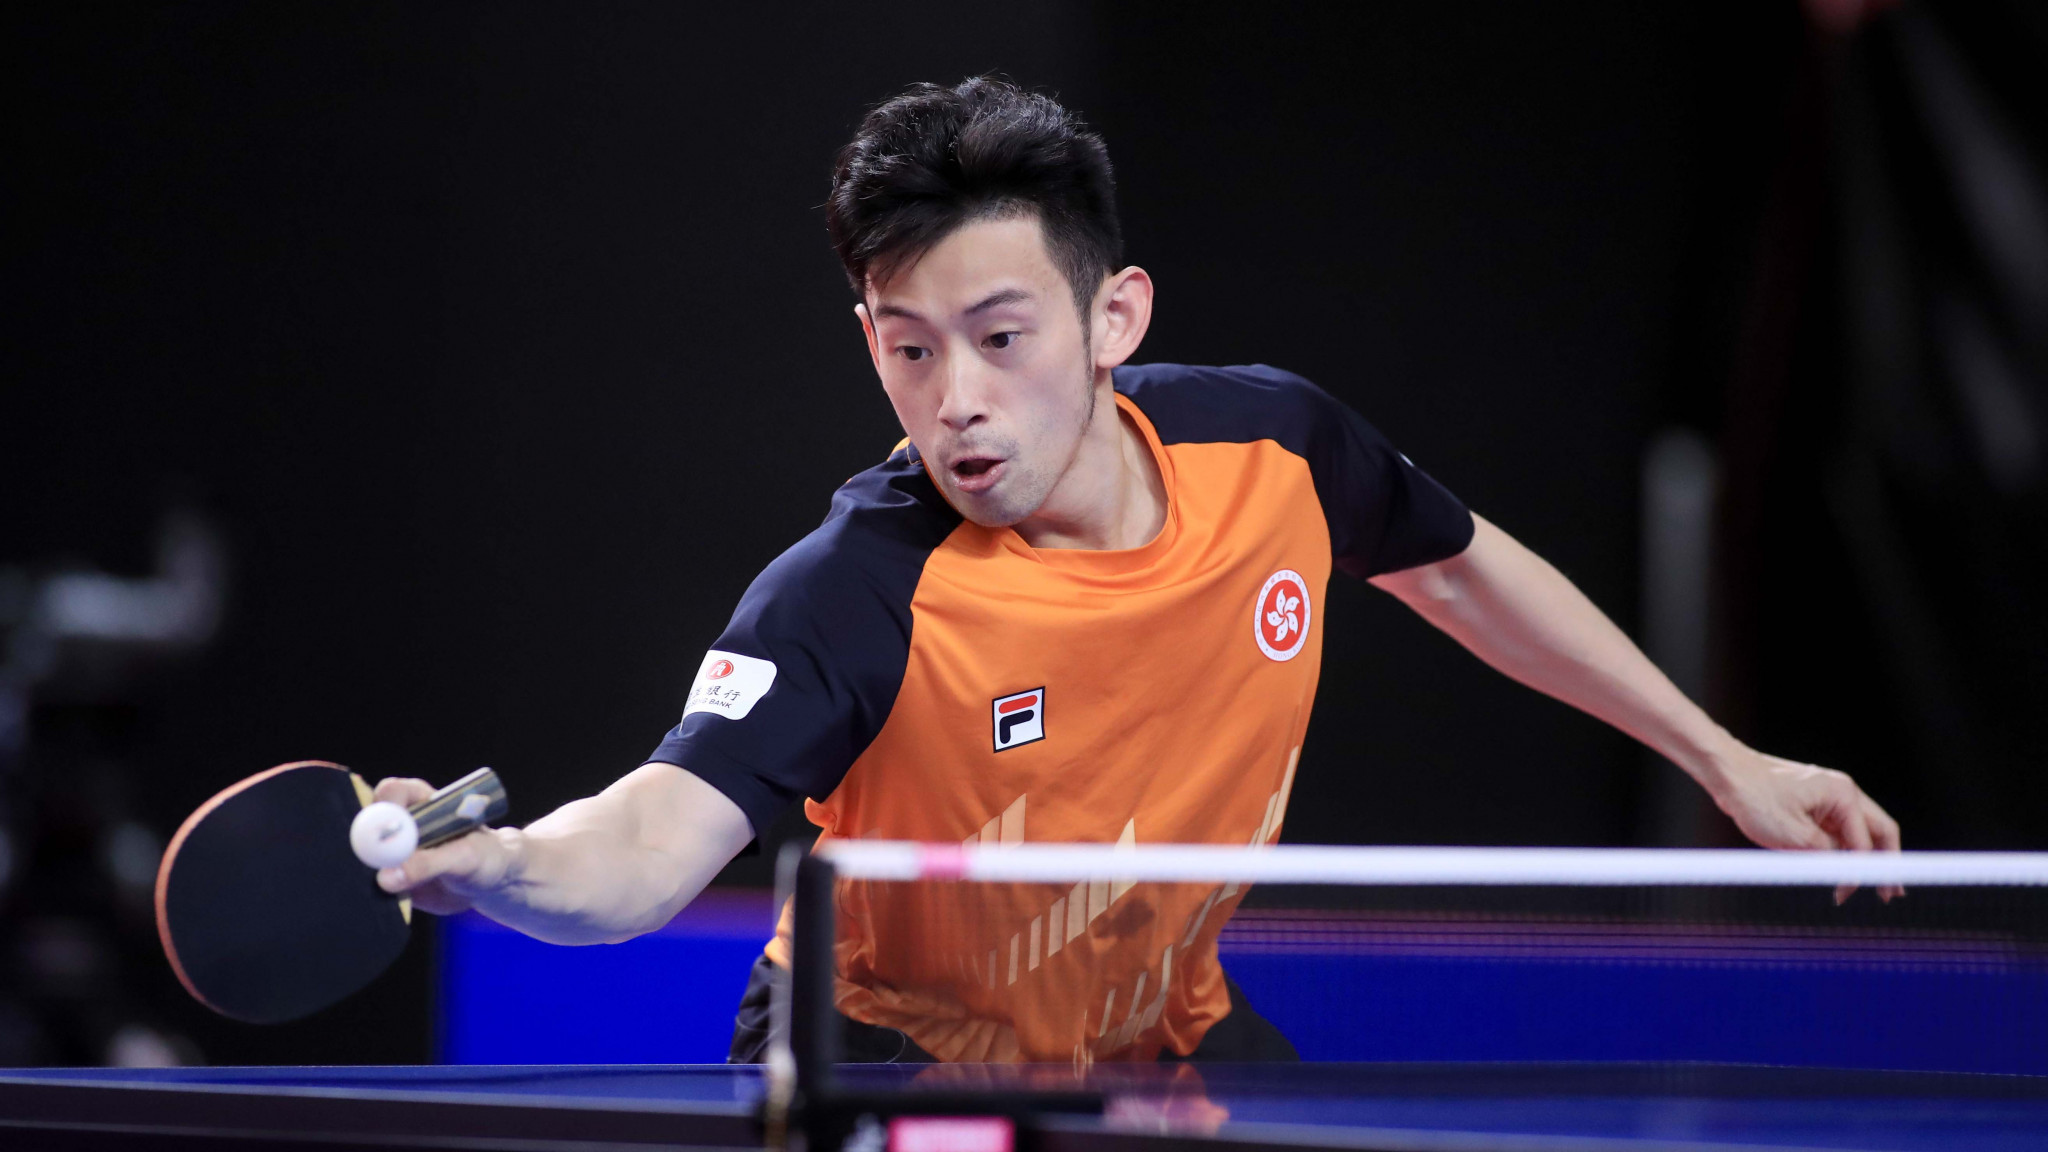 Hong Kong and South Korea book Tokyo 2020 table tennis places at World Team Olympic qualifiers